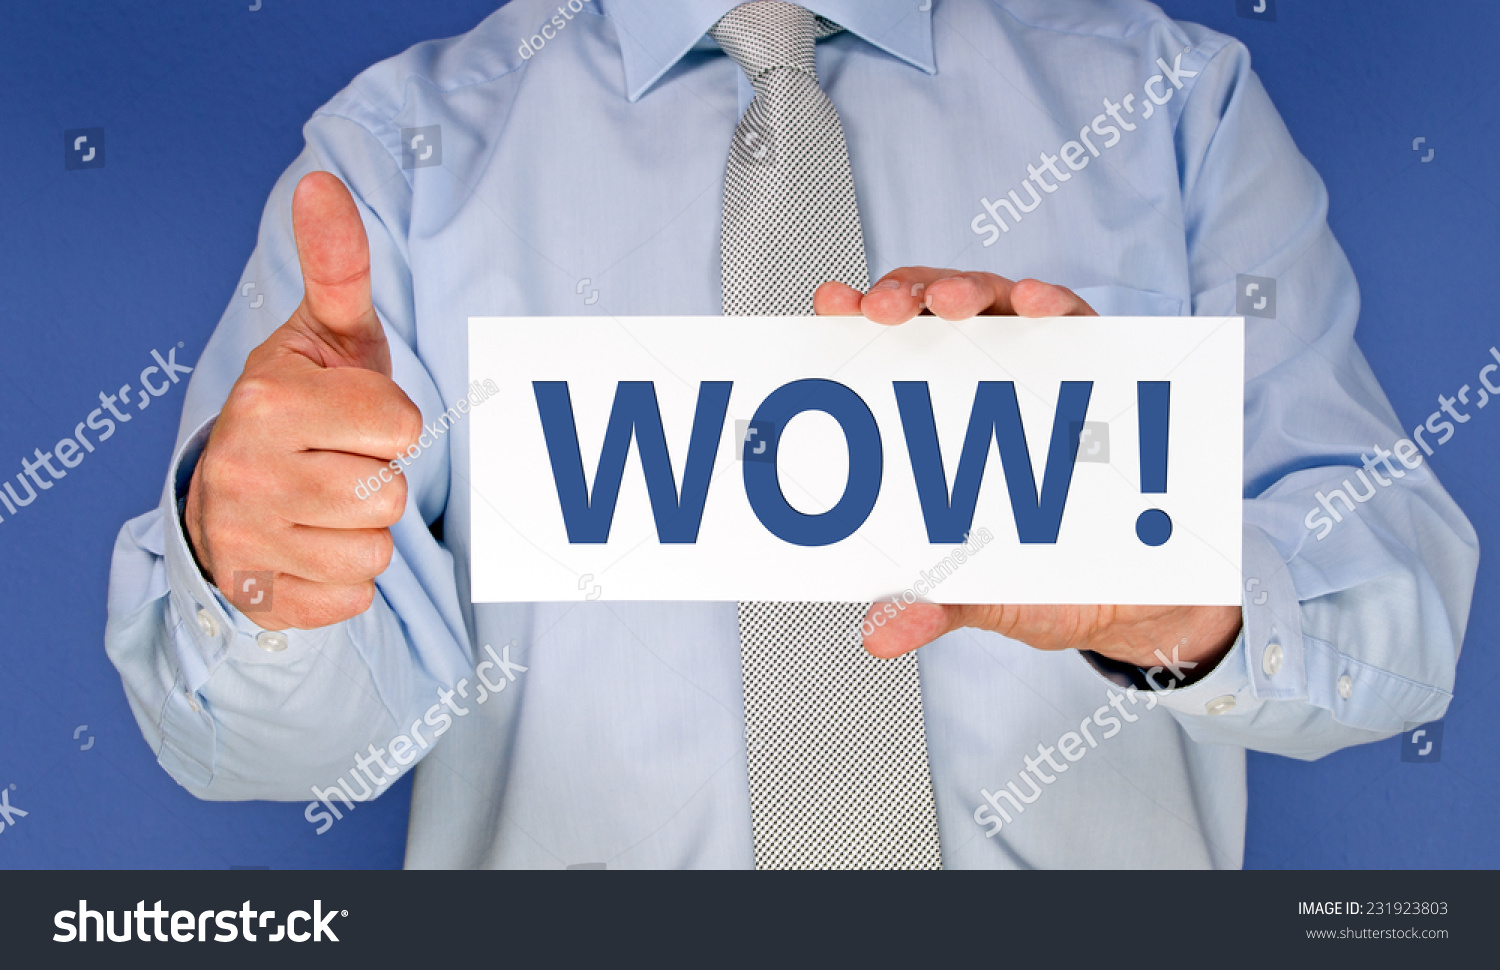 WOW ! - Businessman with card and thumbs up #231923803